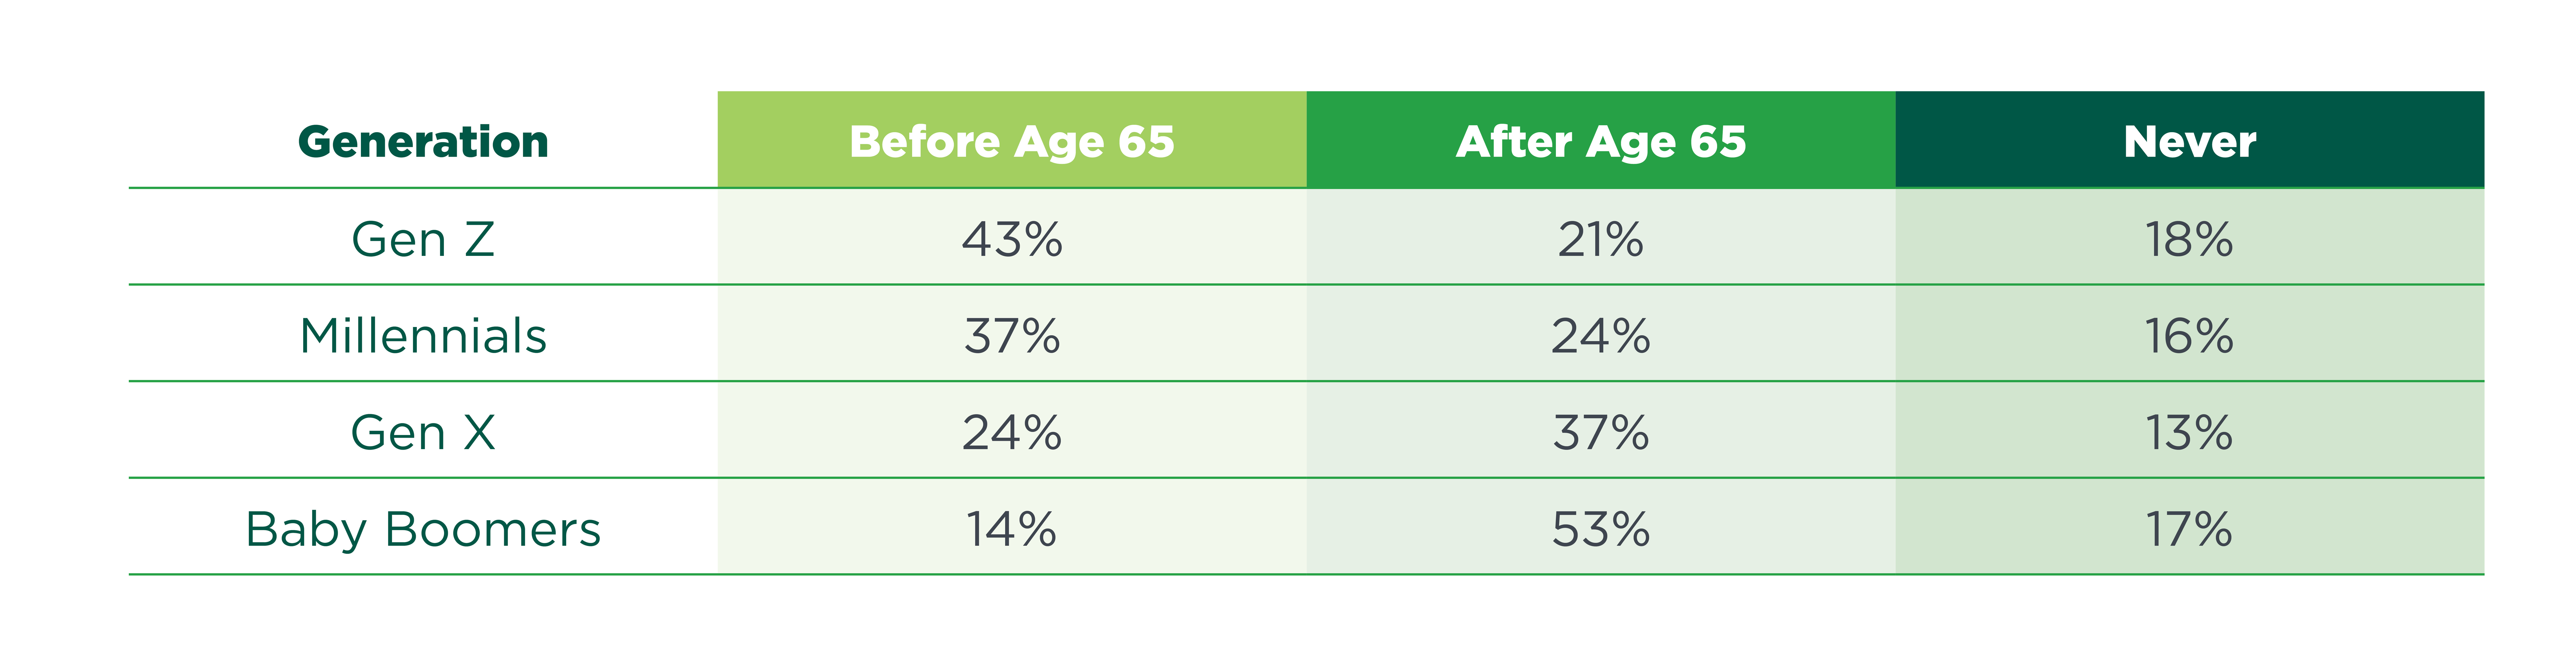 At What Age Do you Expect to Retire Chart